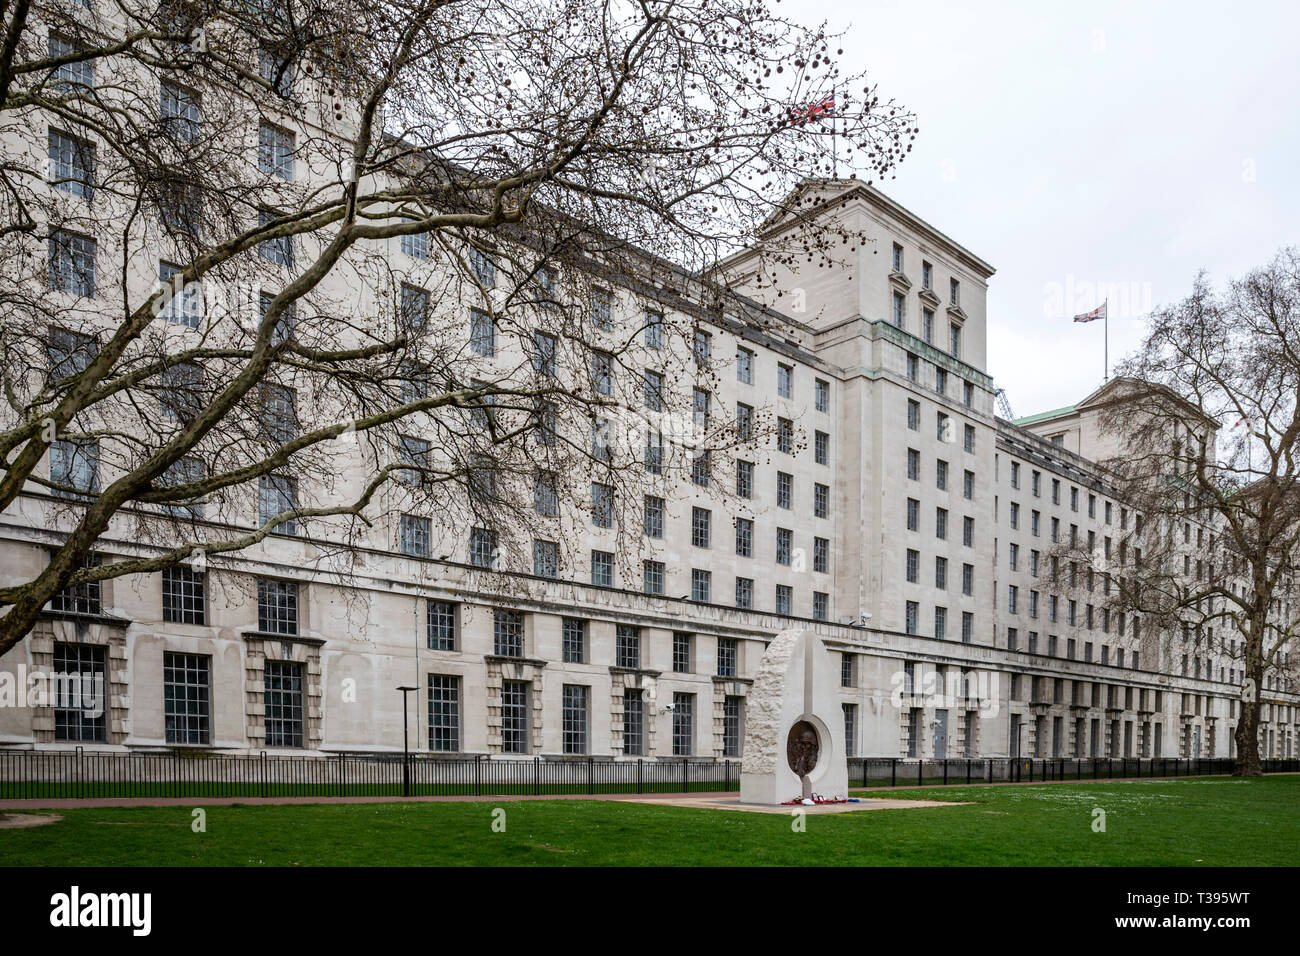 Ministry of Defence Building, London, Saturday, March 23, 2019.Photo: David Rowland / One-Image.com Stock Photo